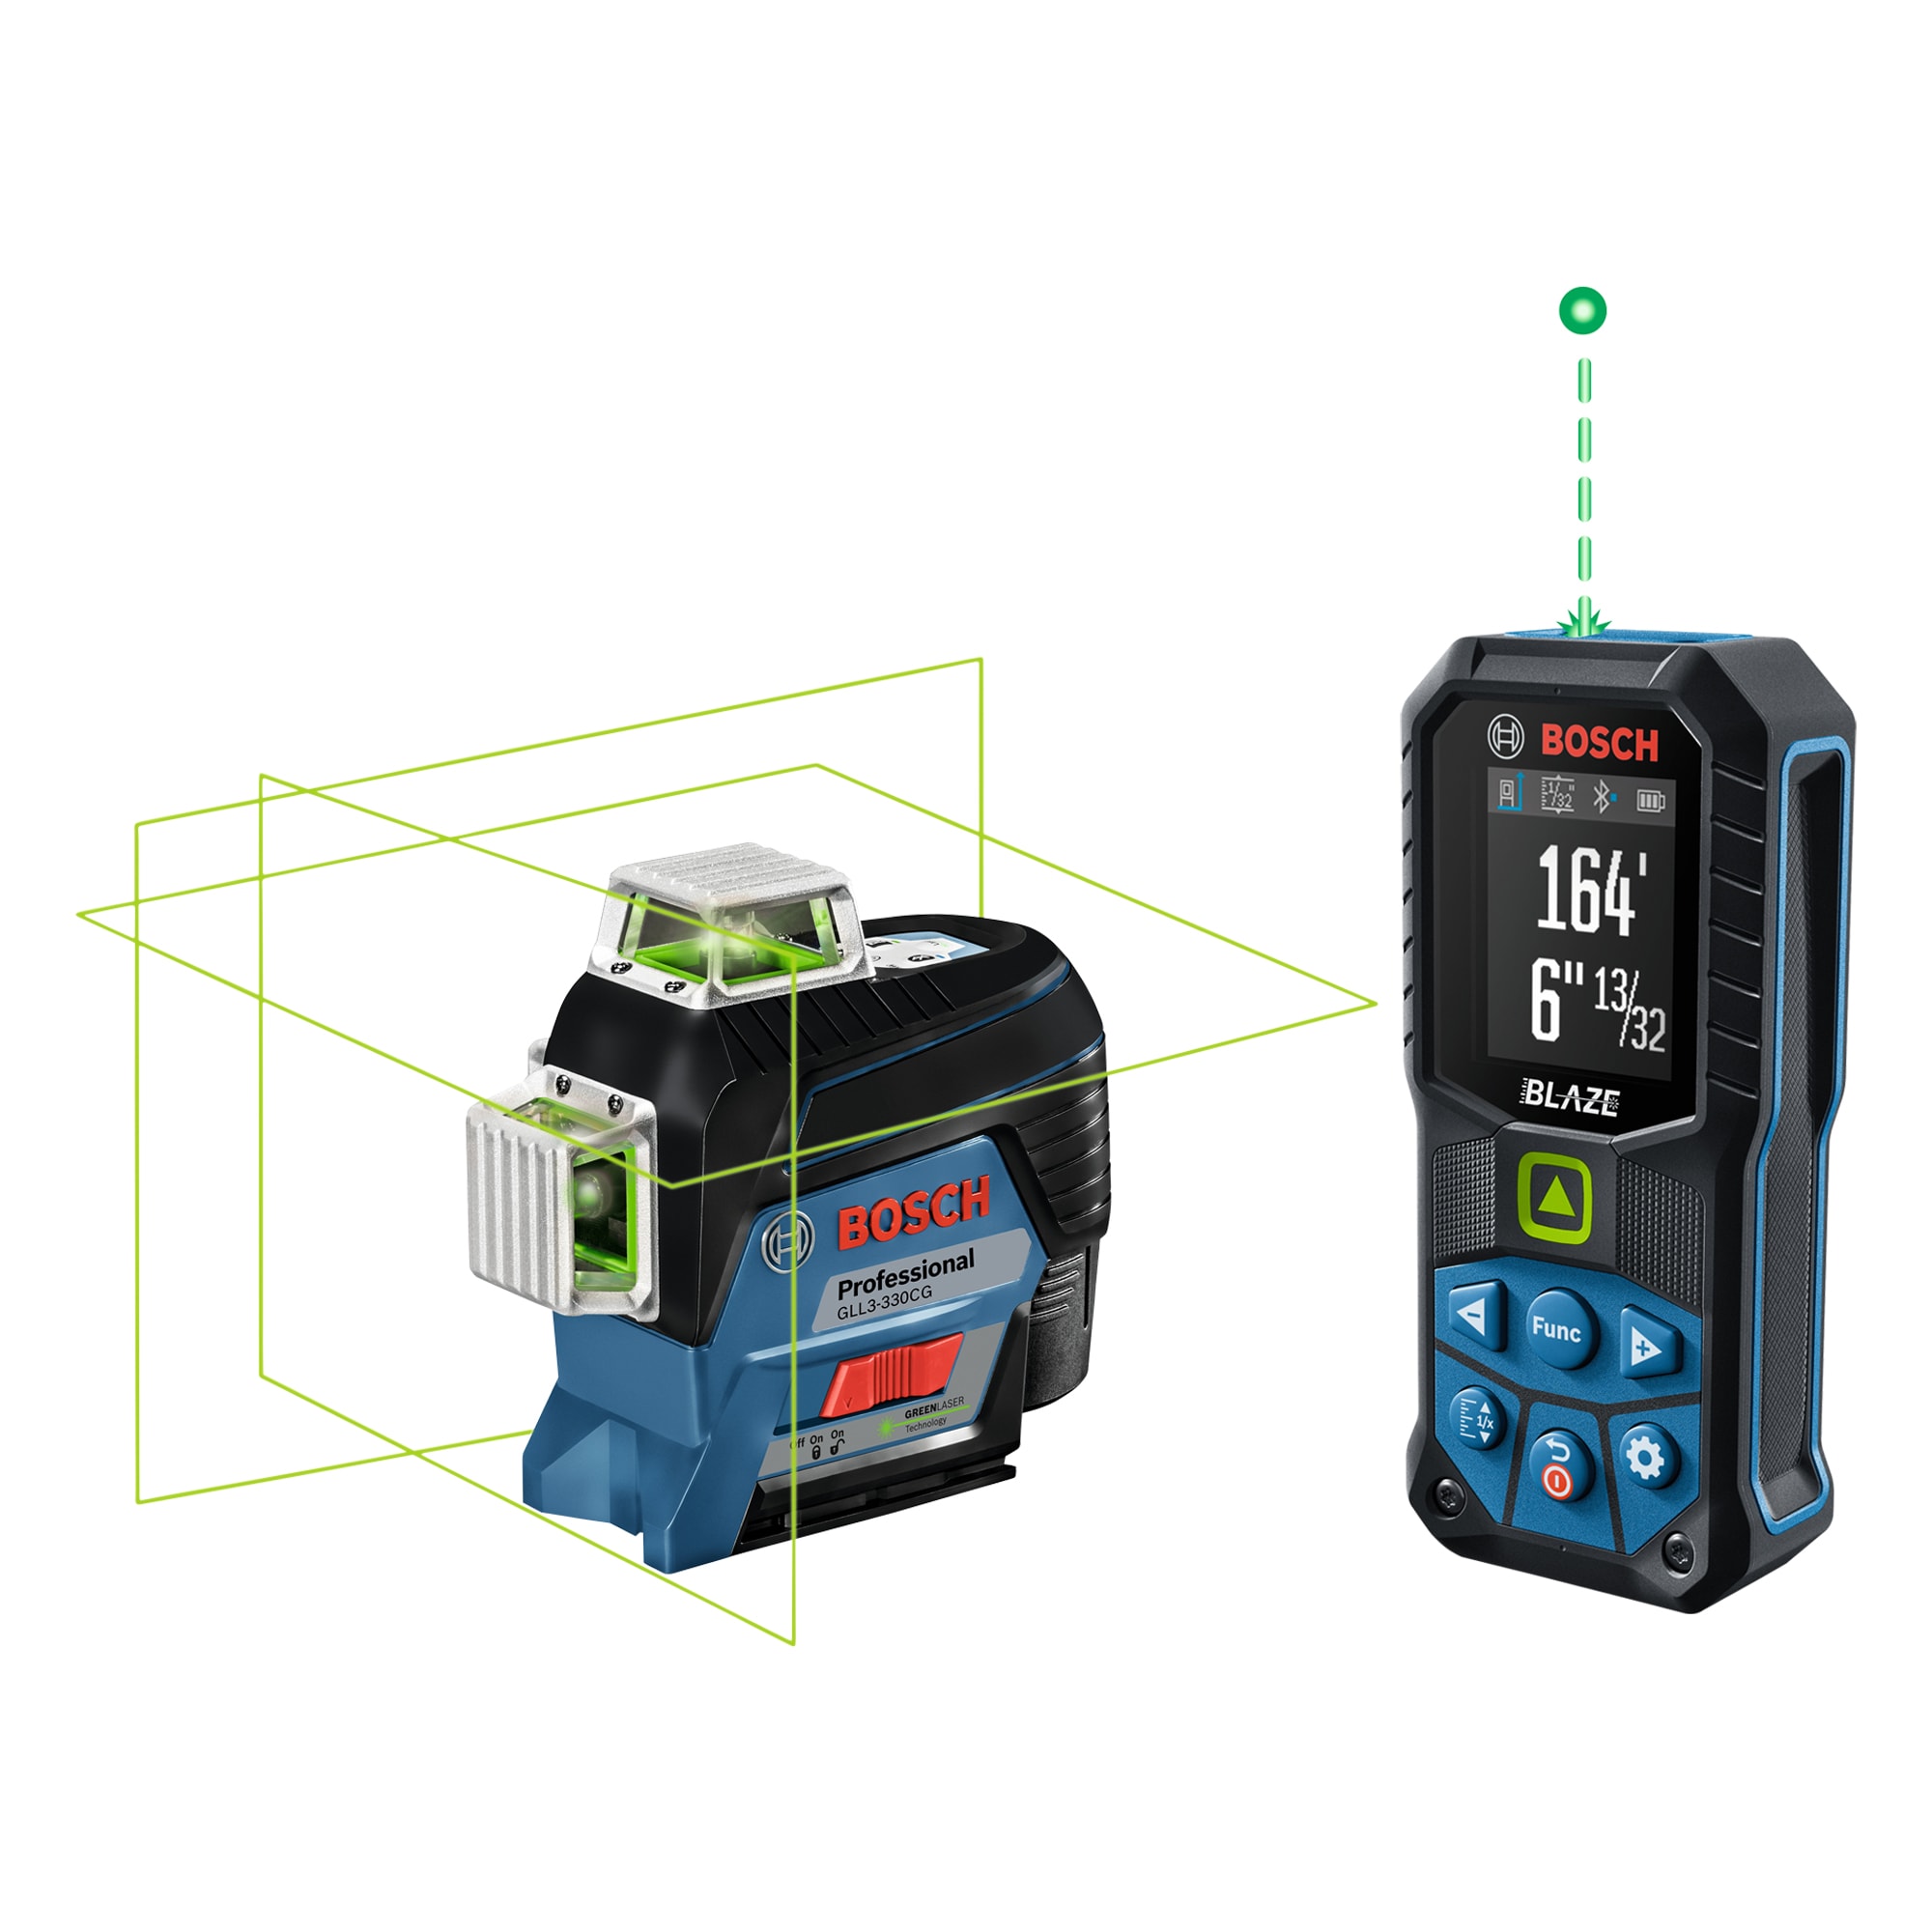 New Bosch Red & Green Laser Measurers Have a Stakeout Accuracy “Deviation”